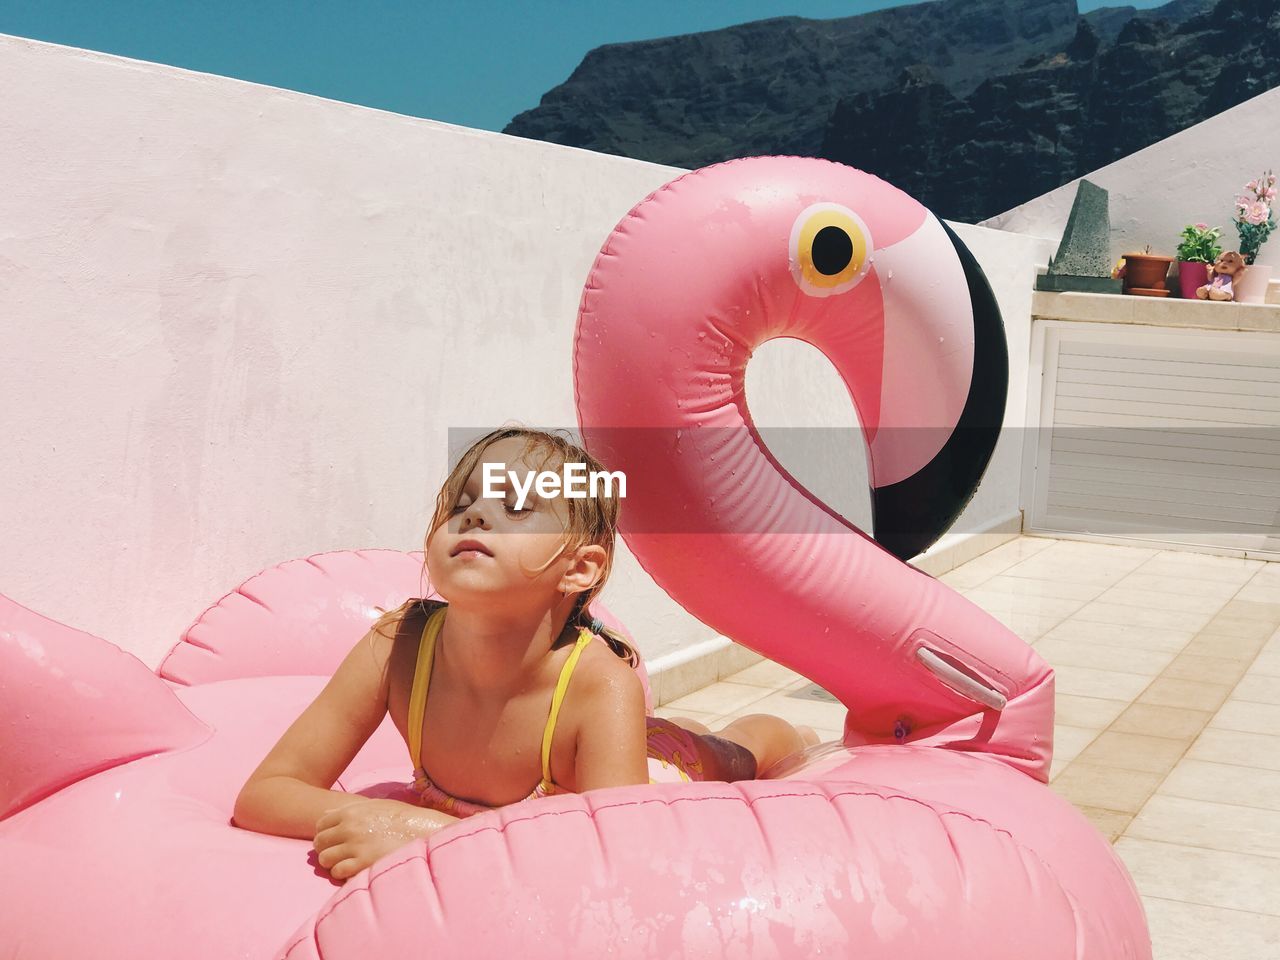 Girl relaxing on inflatable ring in swan shape during sunny day